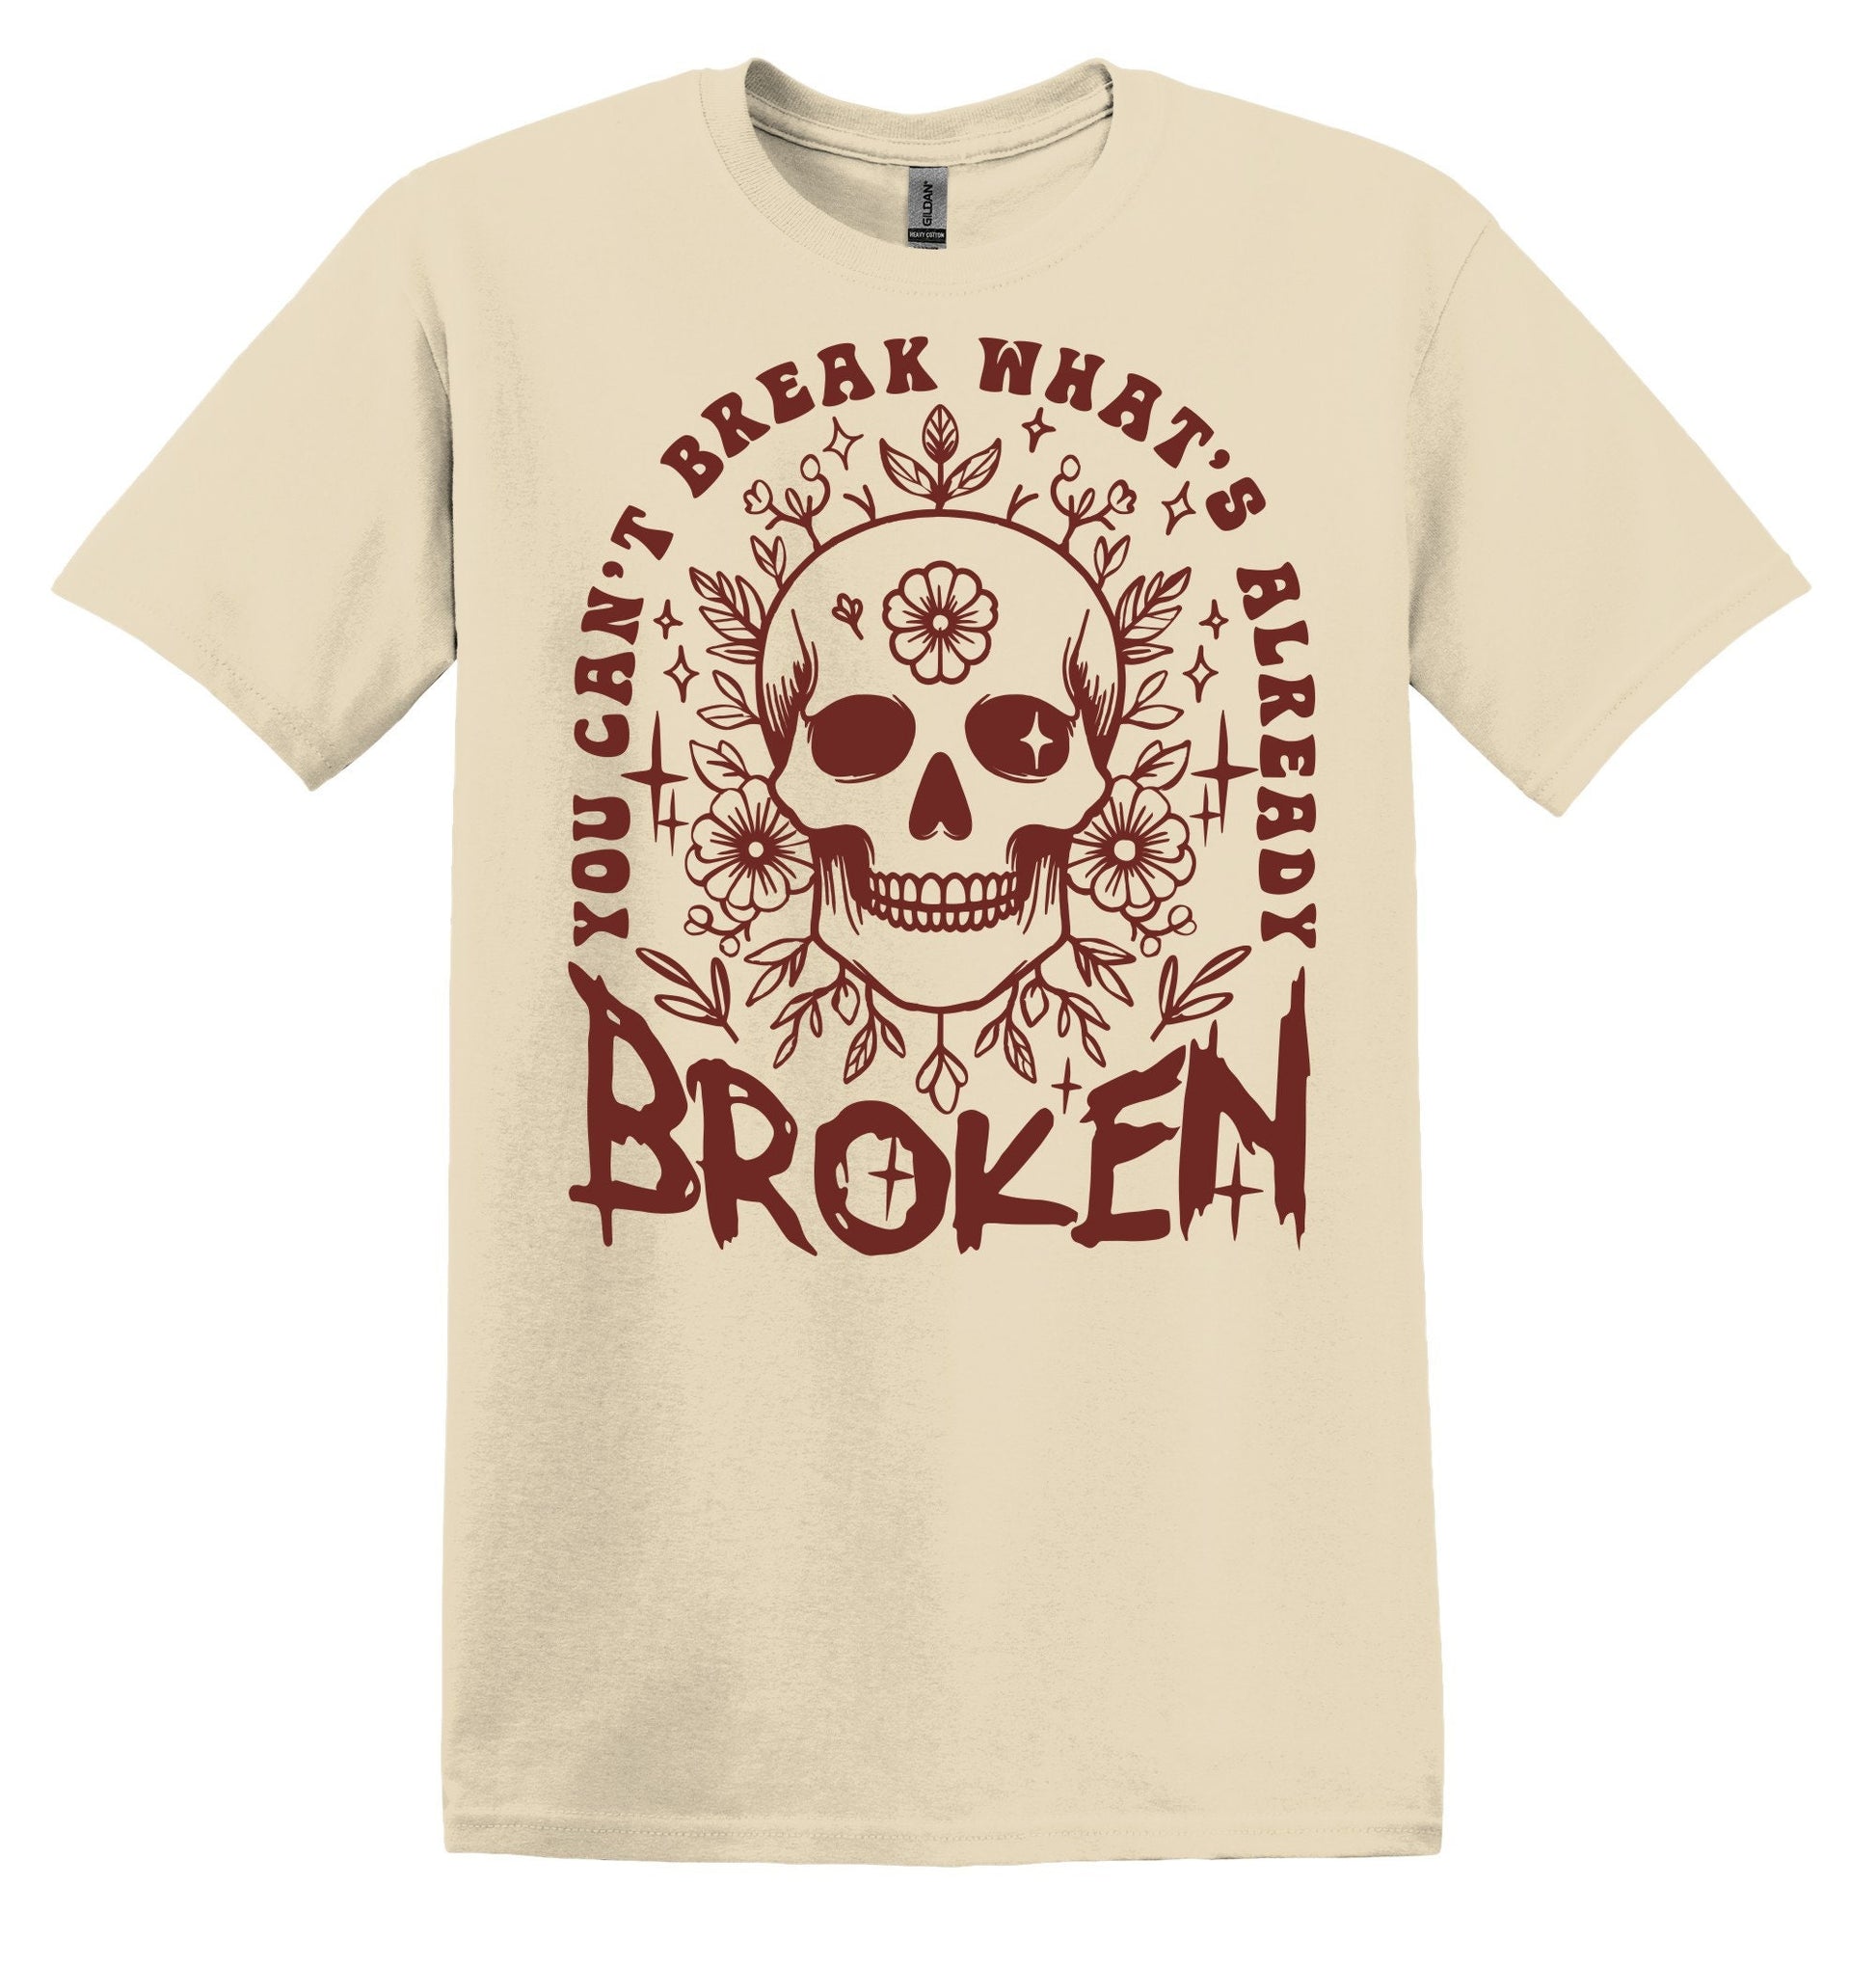 You Can't Break What's Already Broken T-shirt Graphic Shirt Funny Adult TShirt Vintage Funny TShirt Nostalgia T-Shirt Relaxed Cotton T-Shirt